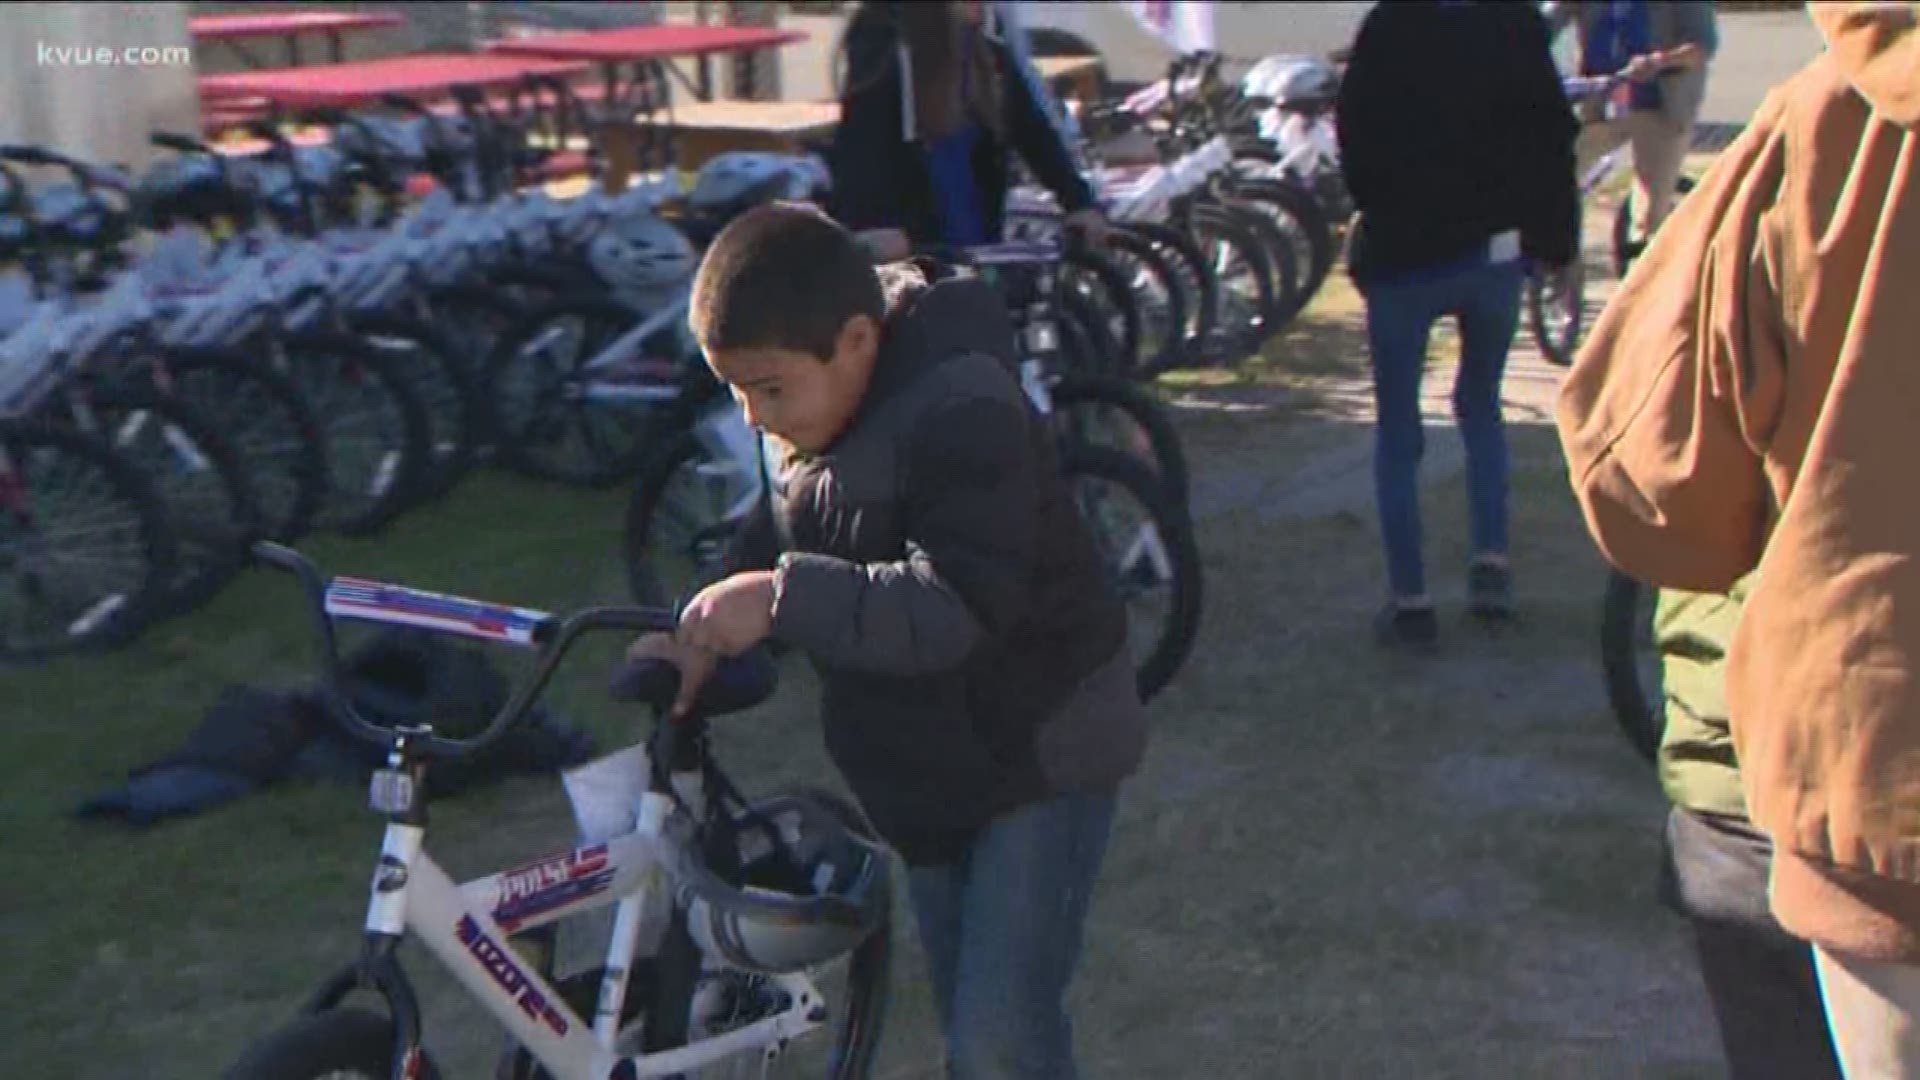 More than 100 kids at T.A. Brown Elementary were given brand new bikes and helmets.